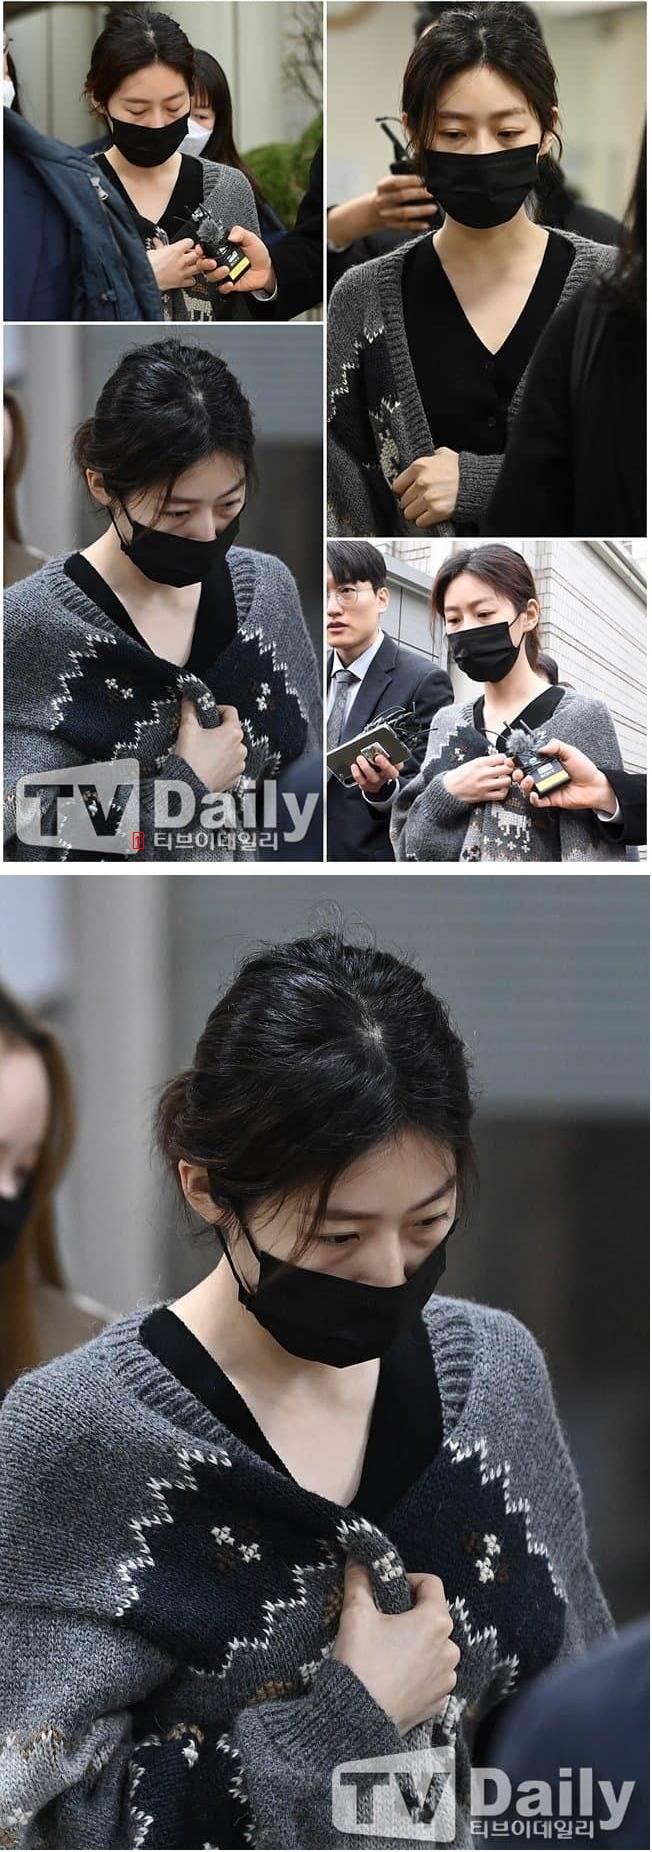 Drunk driving Kim Sae-ron. What's going on?